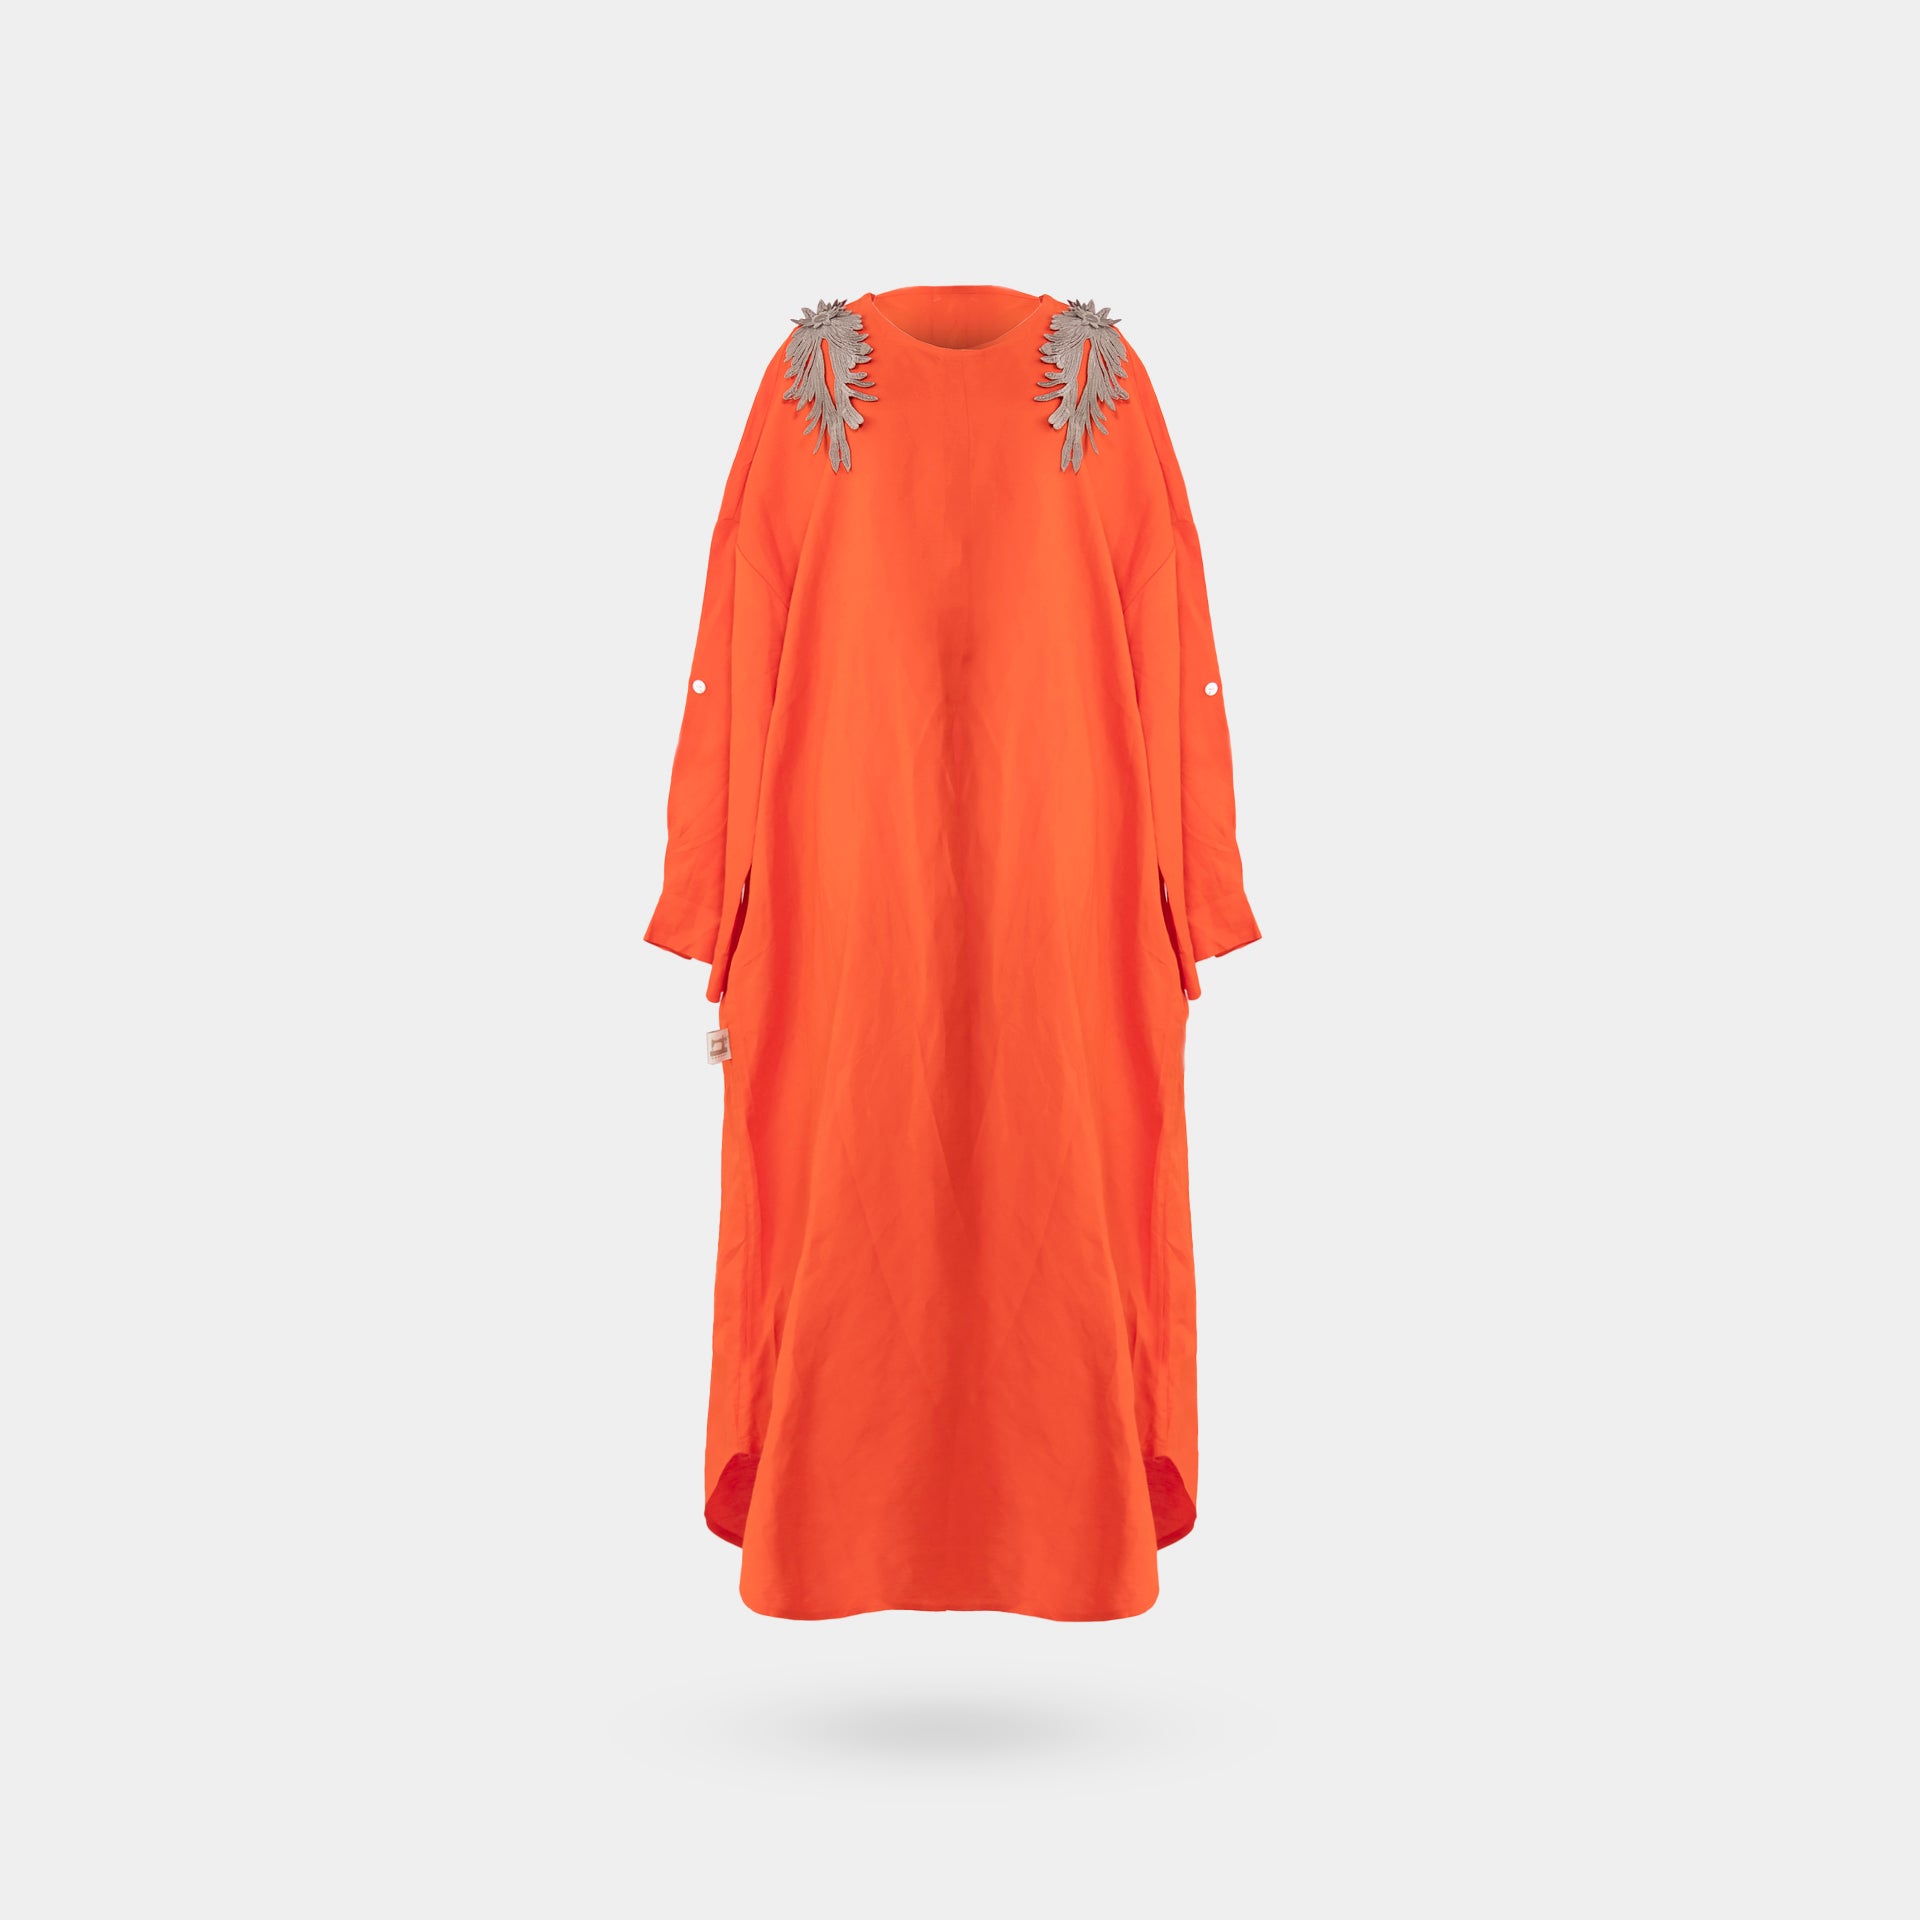 Orange Dress With Beige Flowers On The Shoulder With Long Sleeves From Darzah